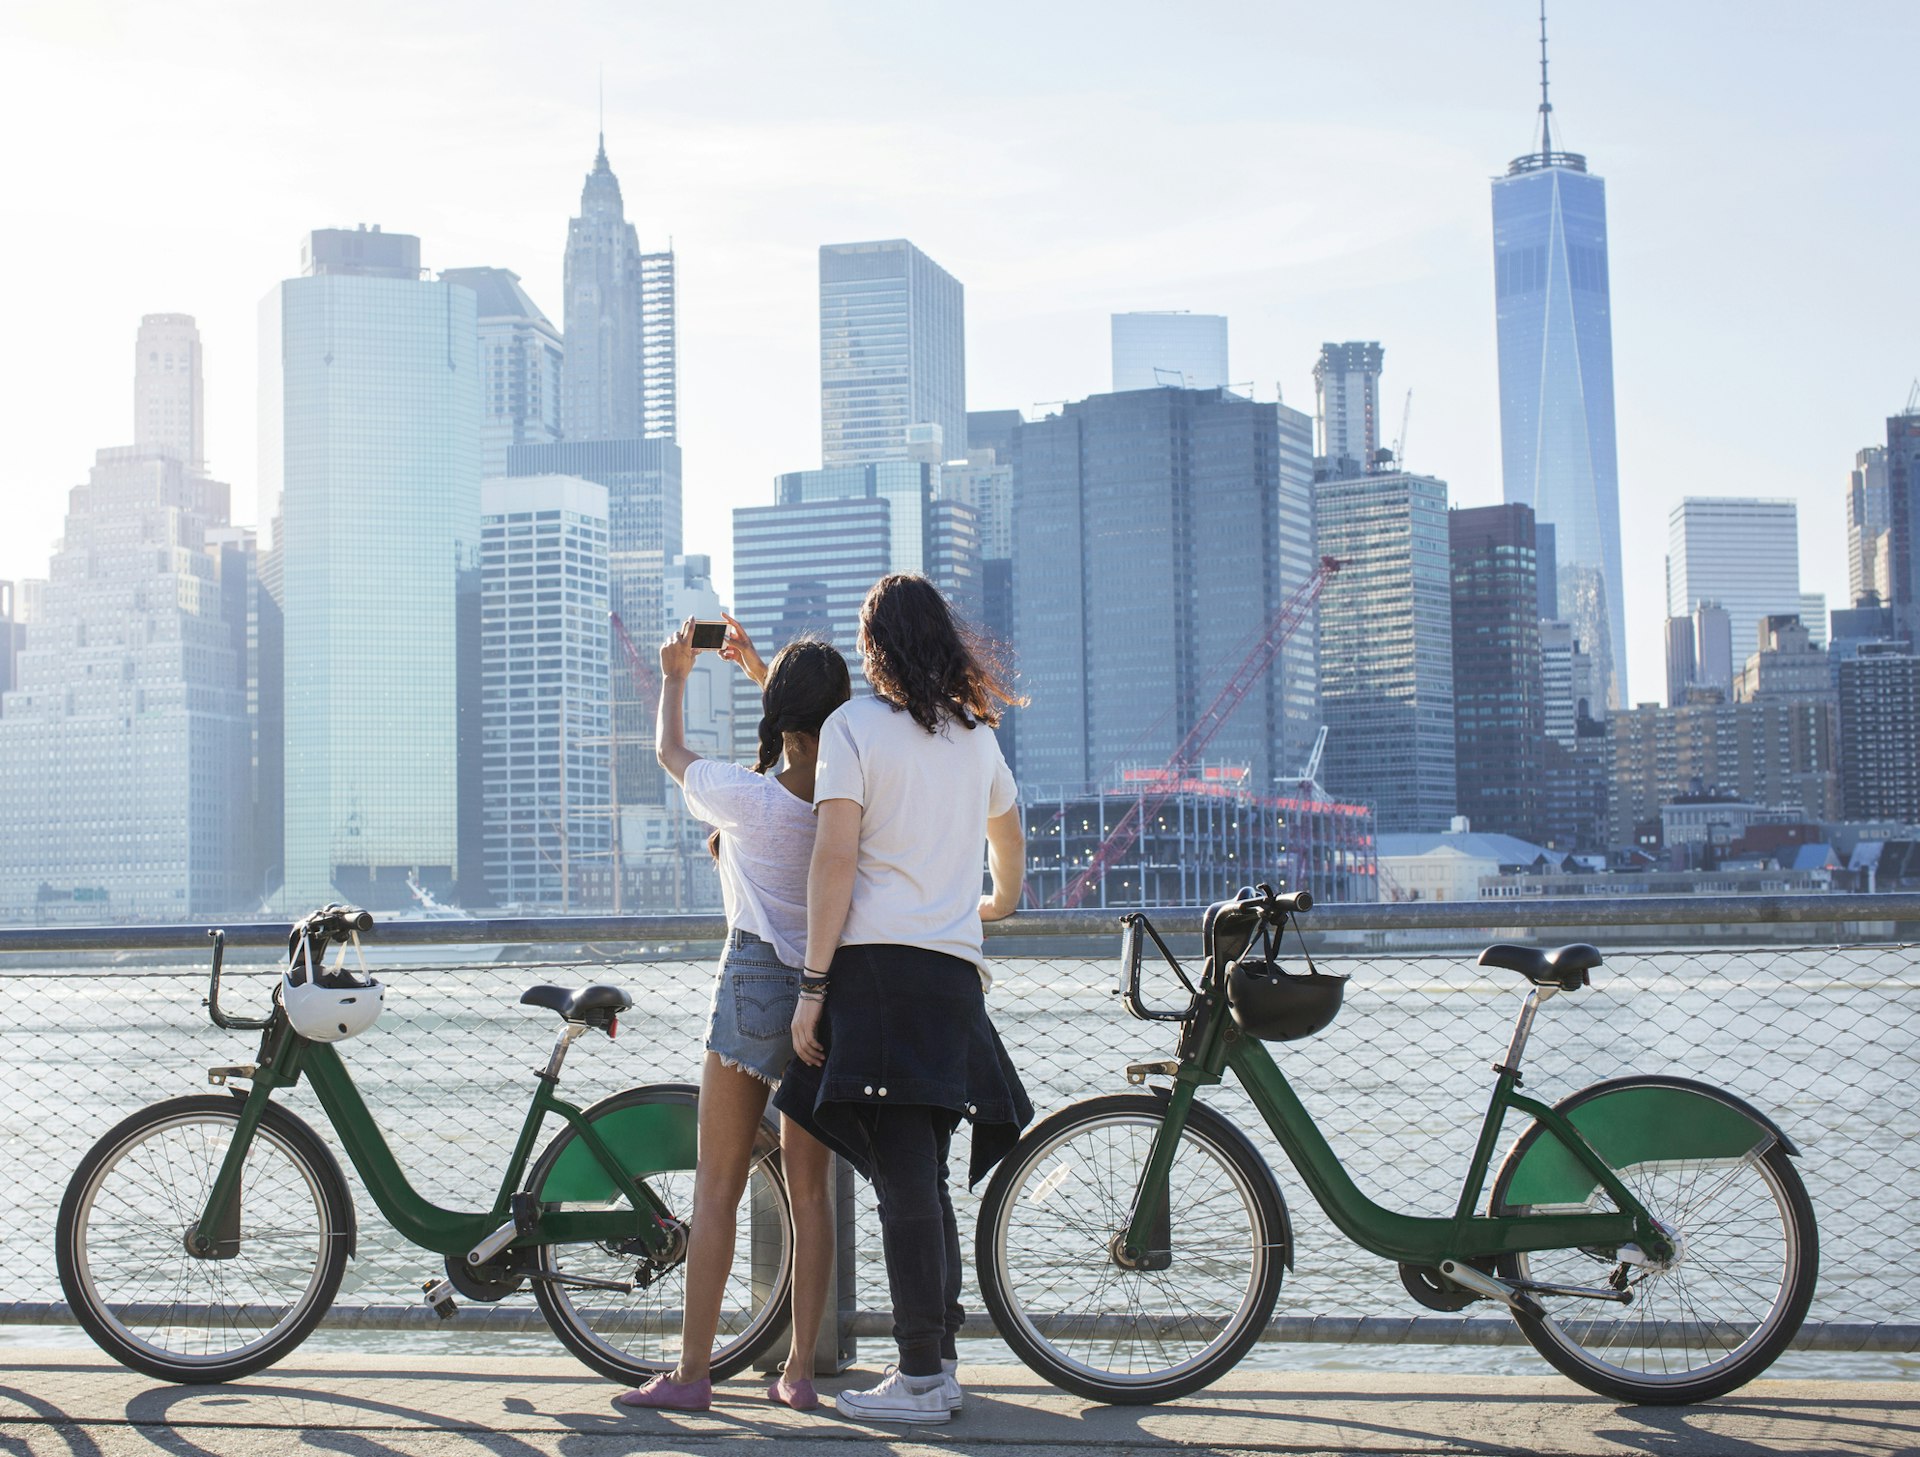 A couple with bikes pause to take a photo of the NYC skyline